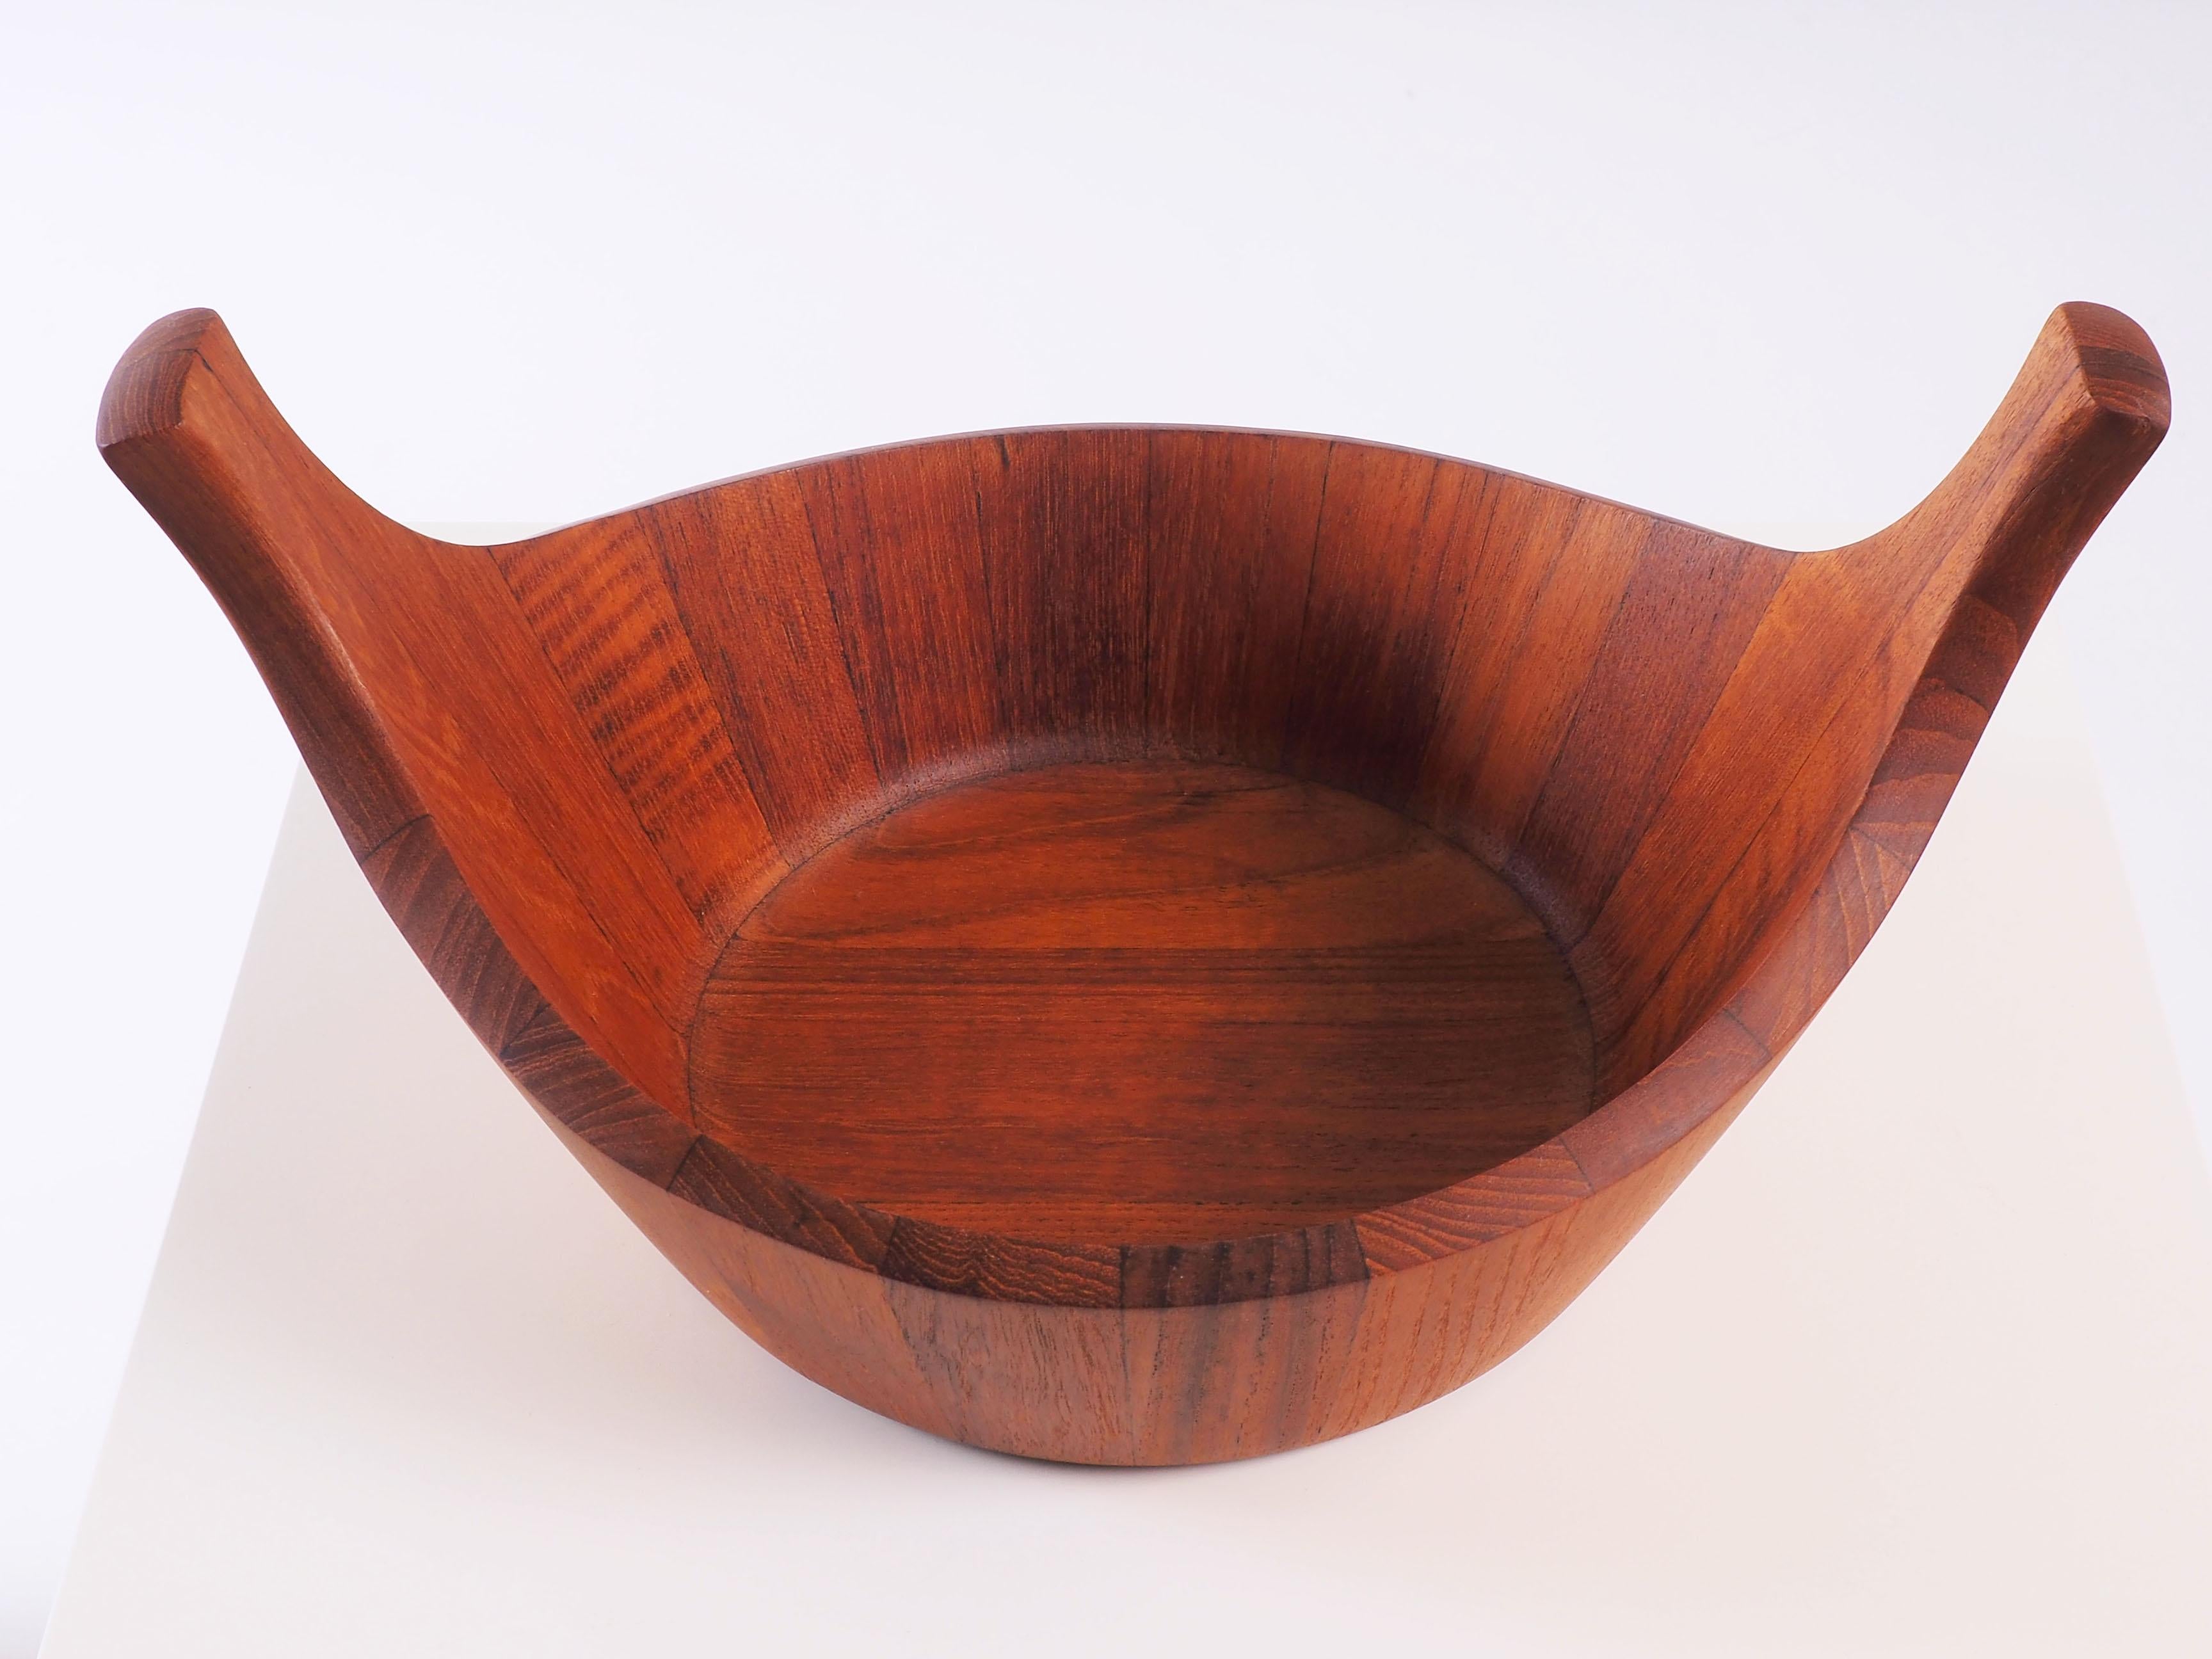 Staved Teak Bowl by the Danish designer Jens Harald Quistgaard In Good Condition For Sale In Goteborg, SE